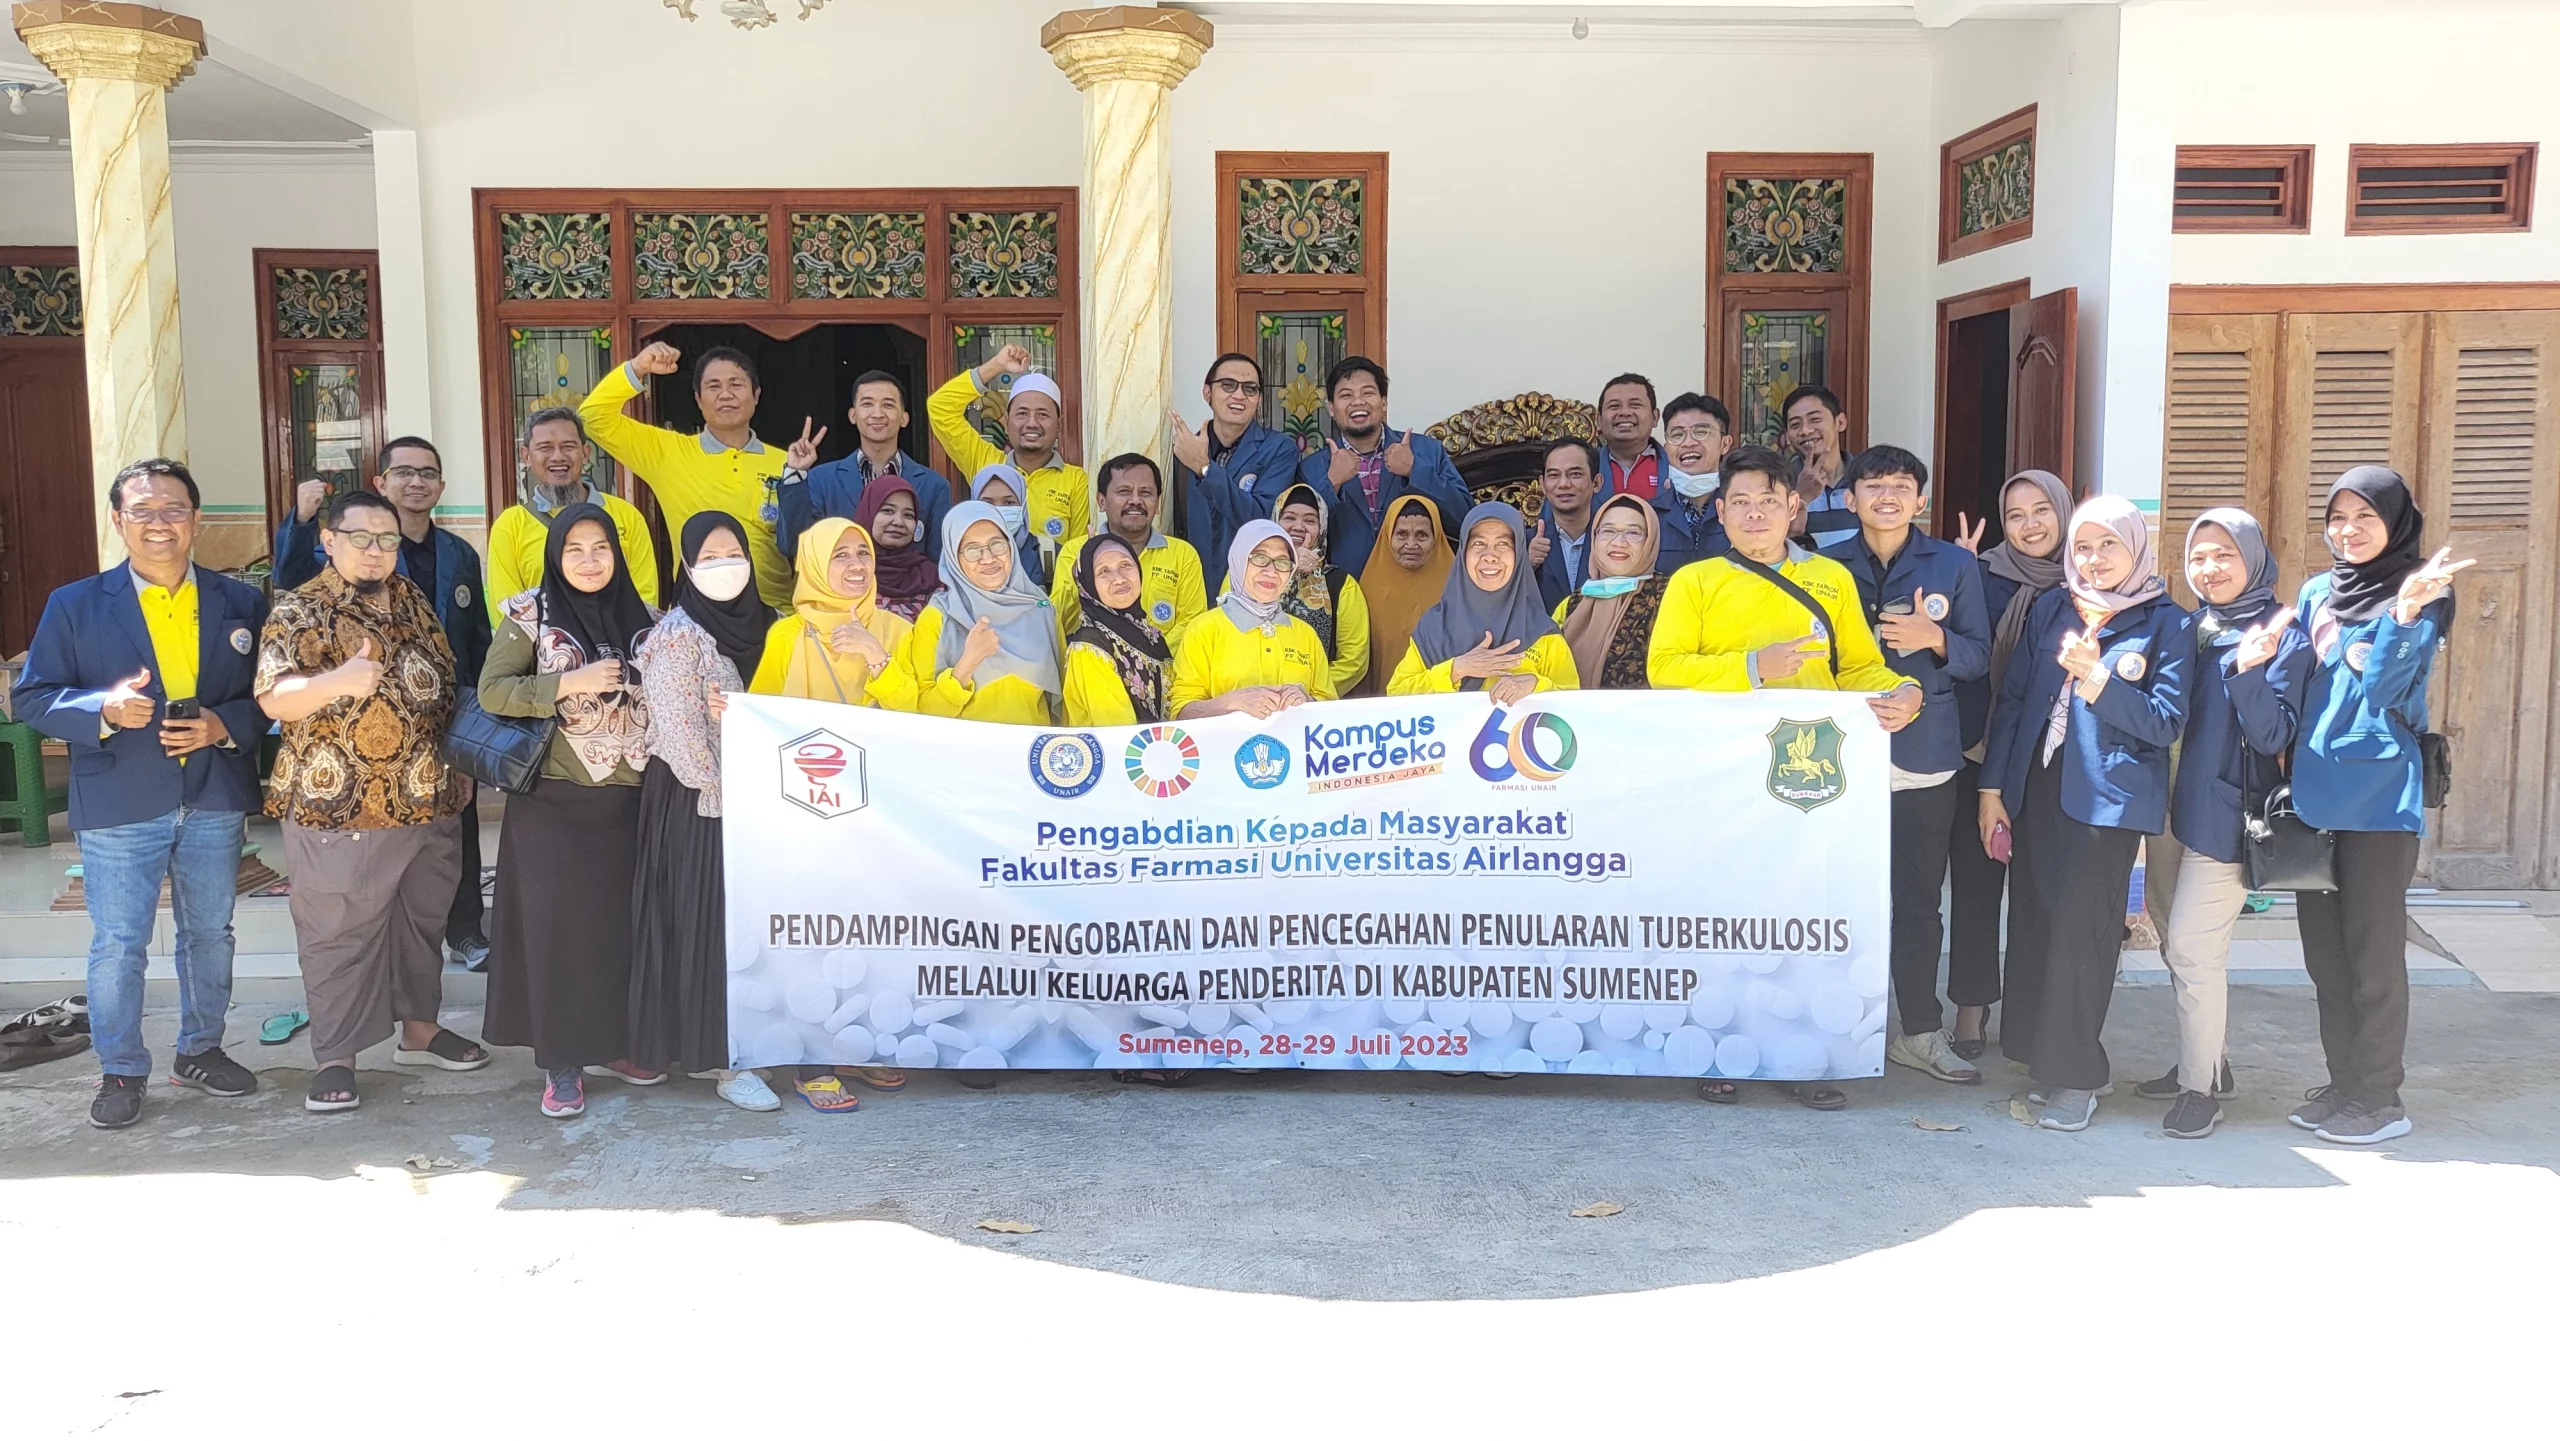 Lecturers, administrative staff, and students from the Faculty of Pharmacy UNAIR during the community service program in Sumenep.